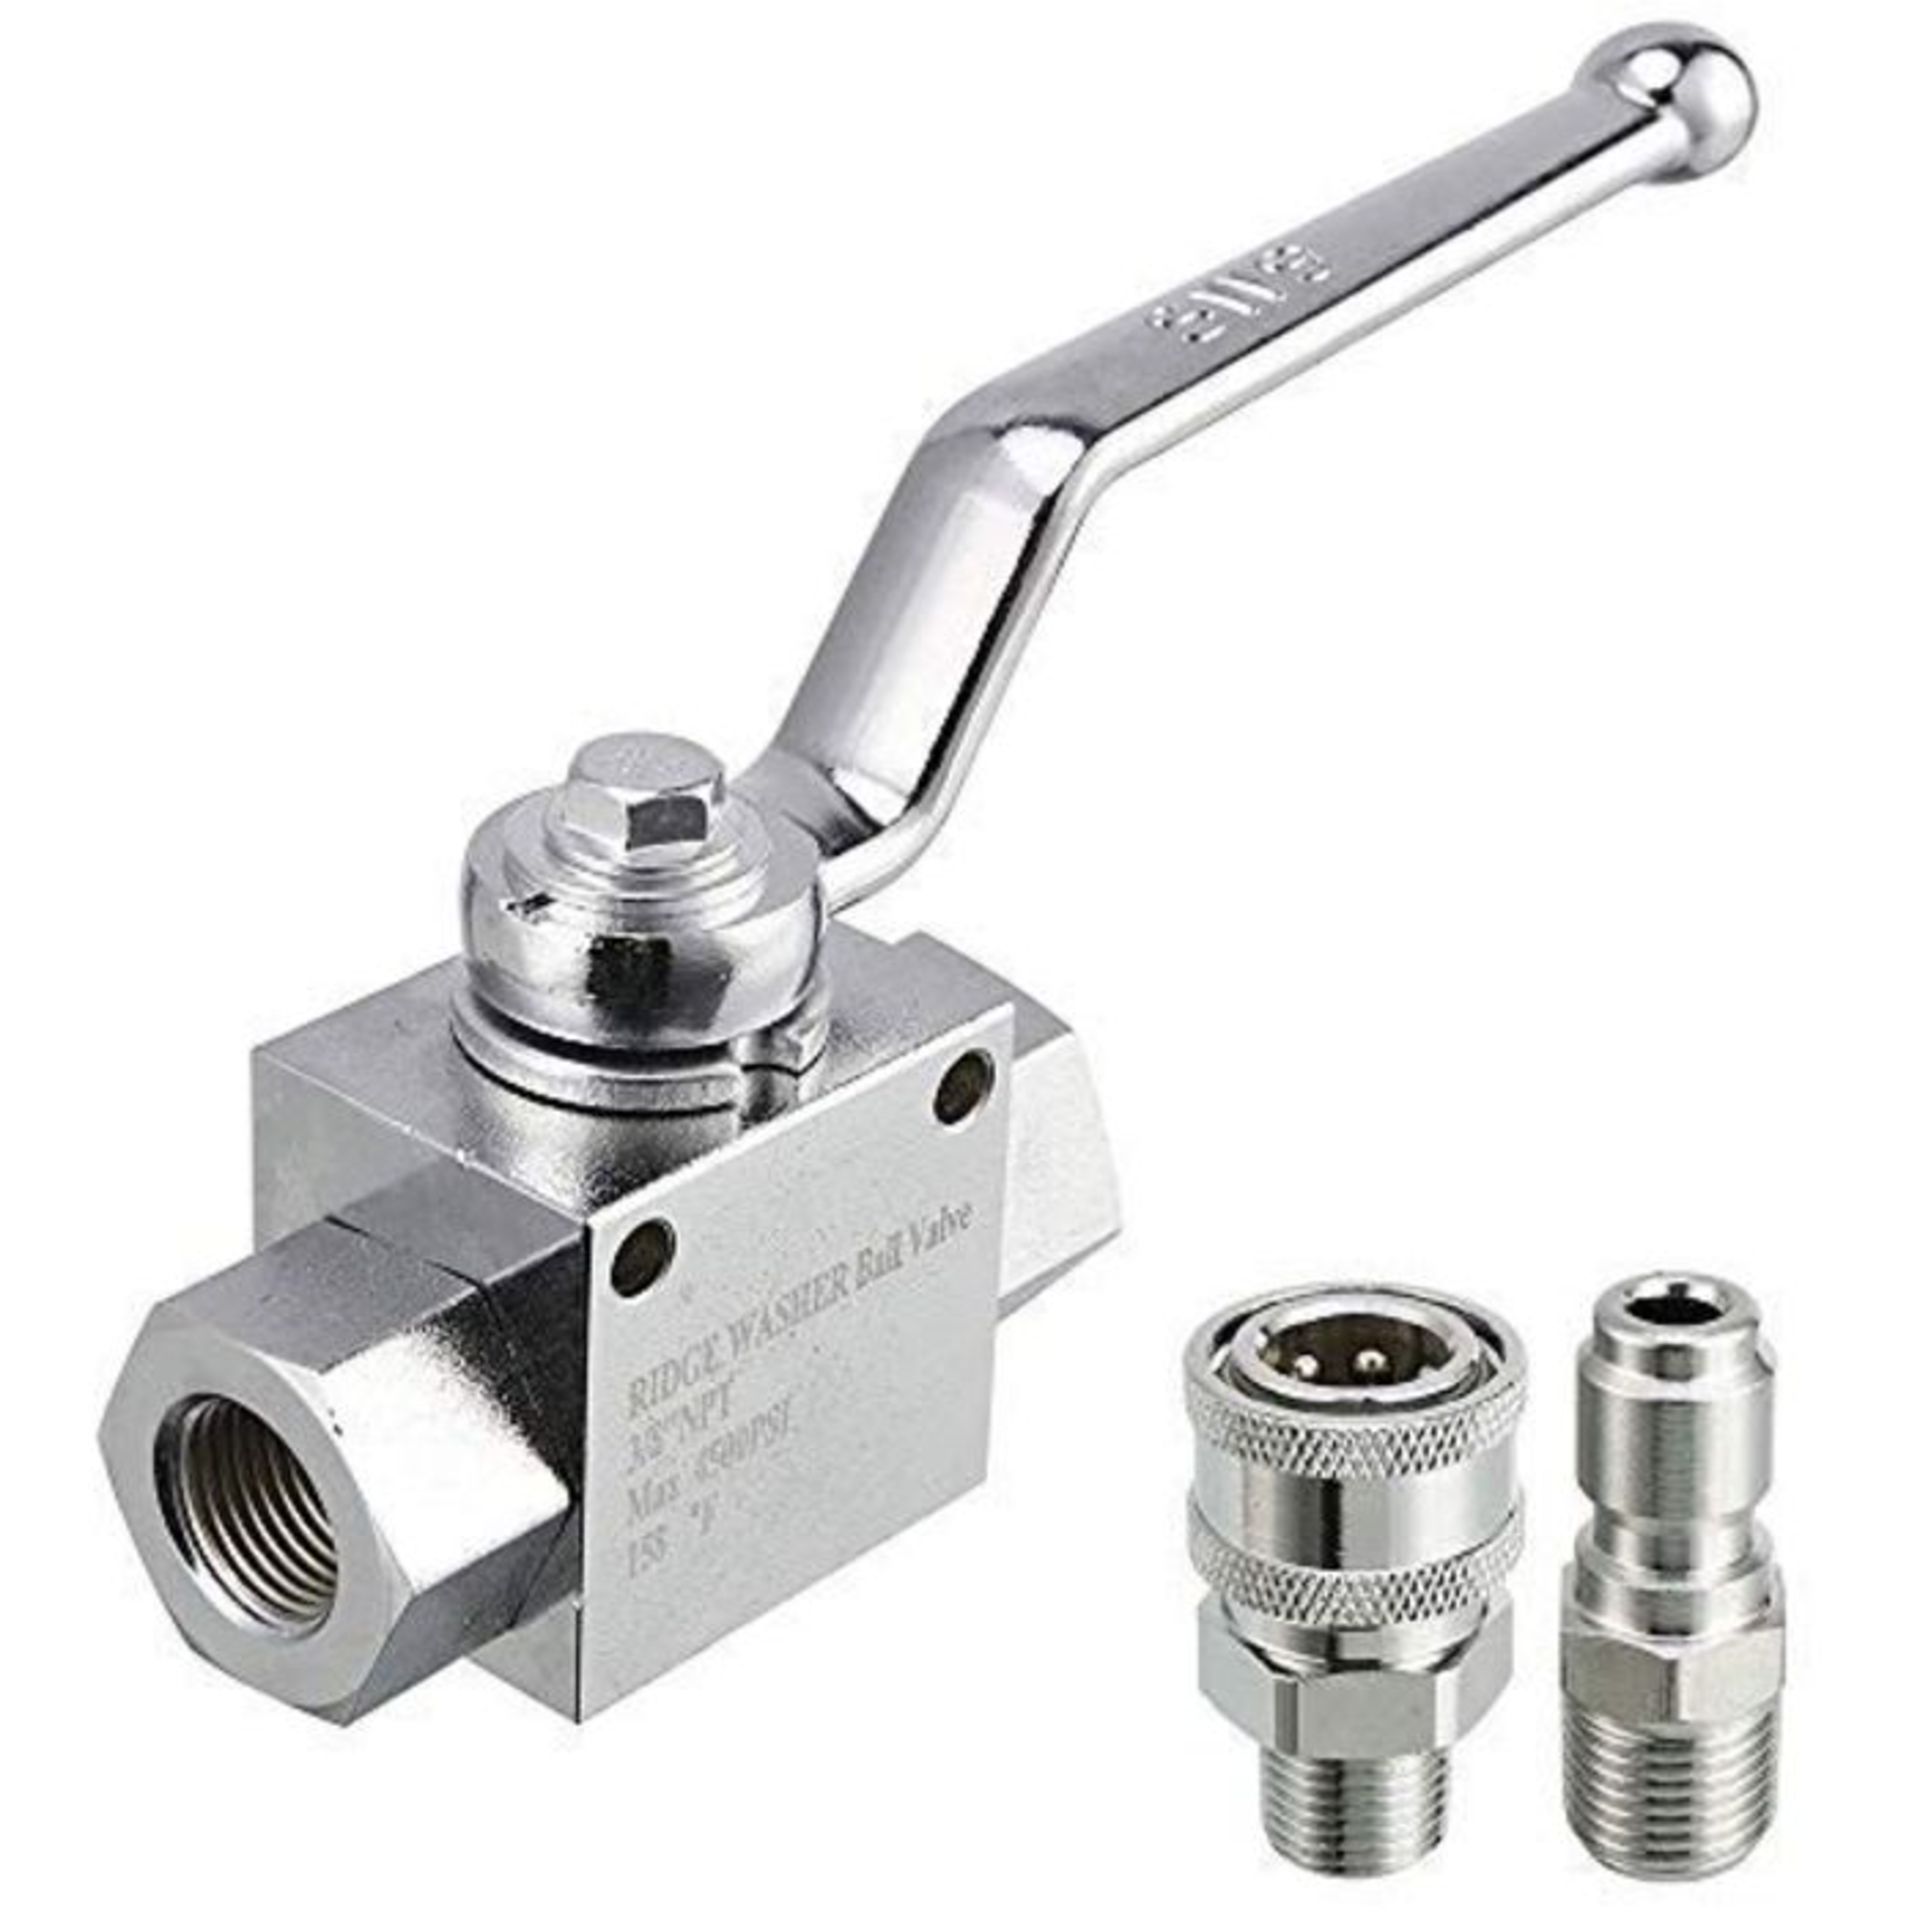 High-pressure ball valve set for pressure washer hose, 3/8 inch quick coupling, 4500 P